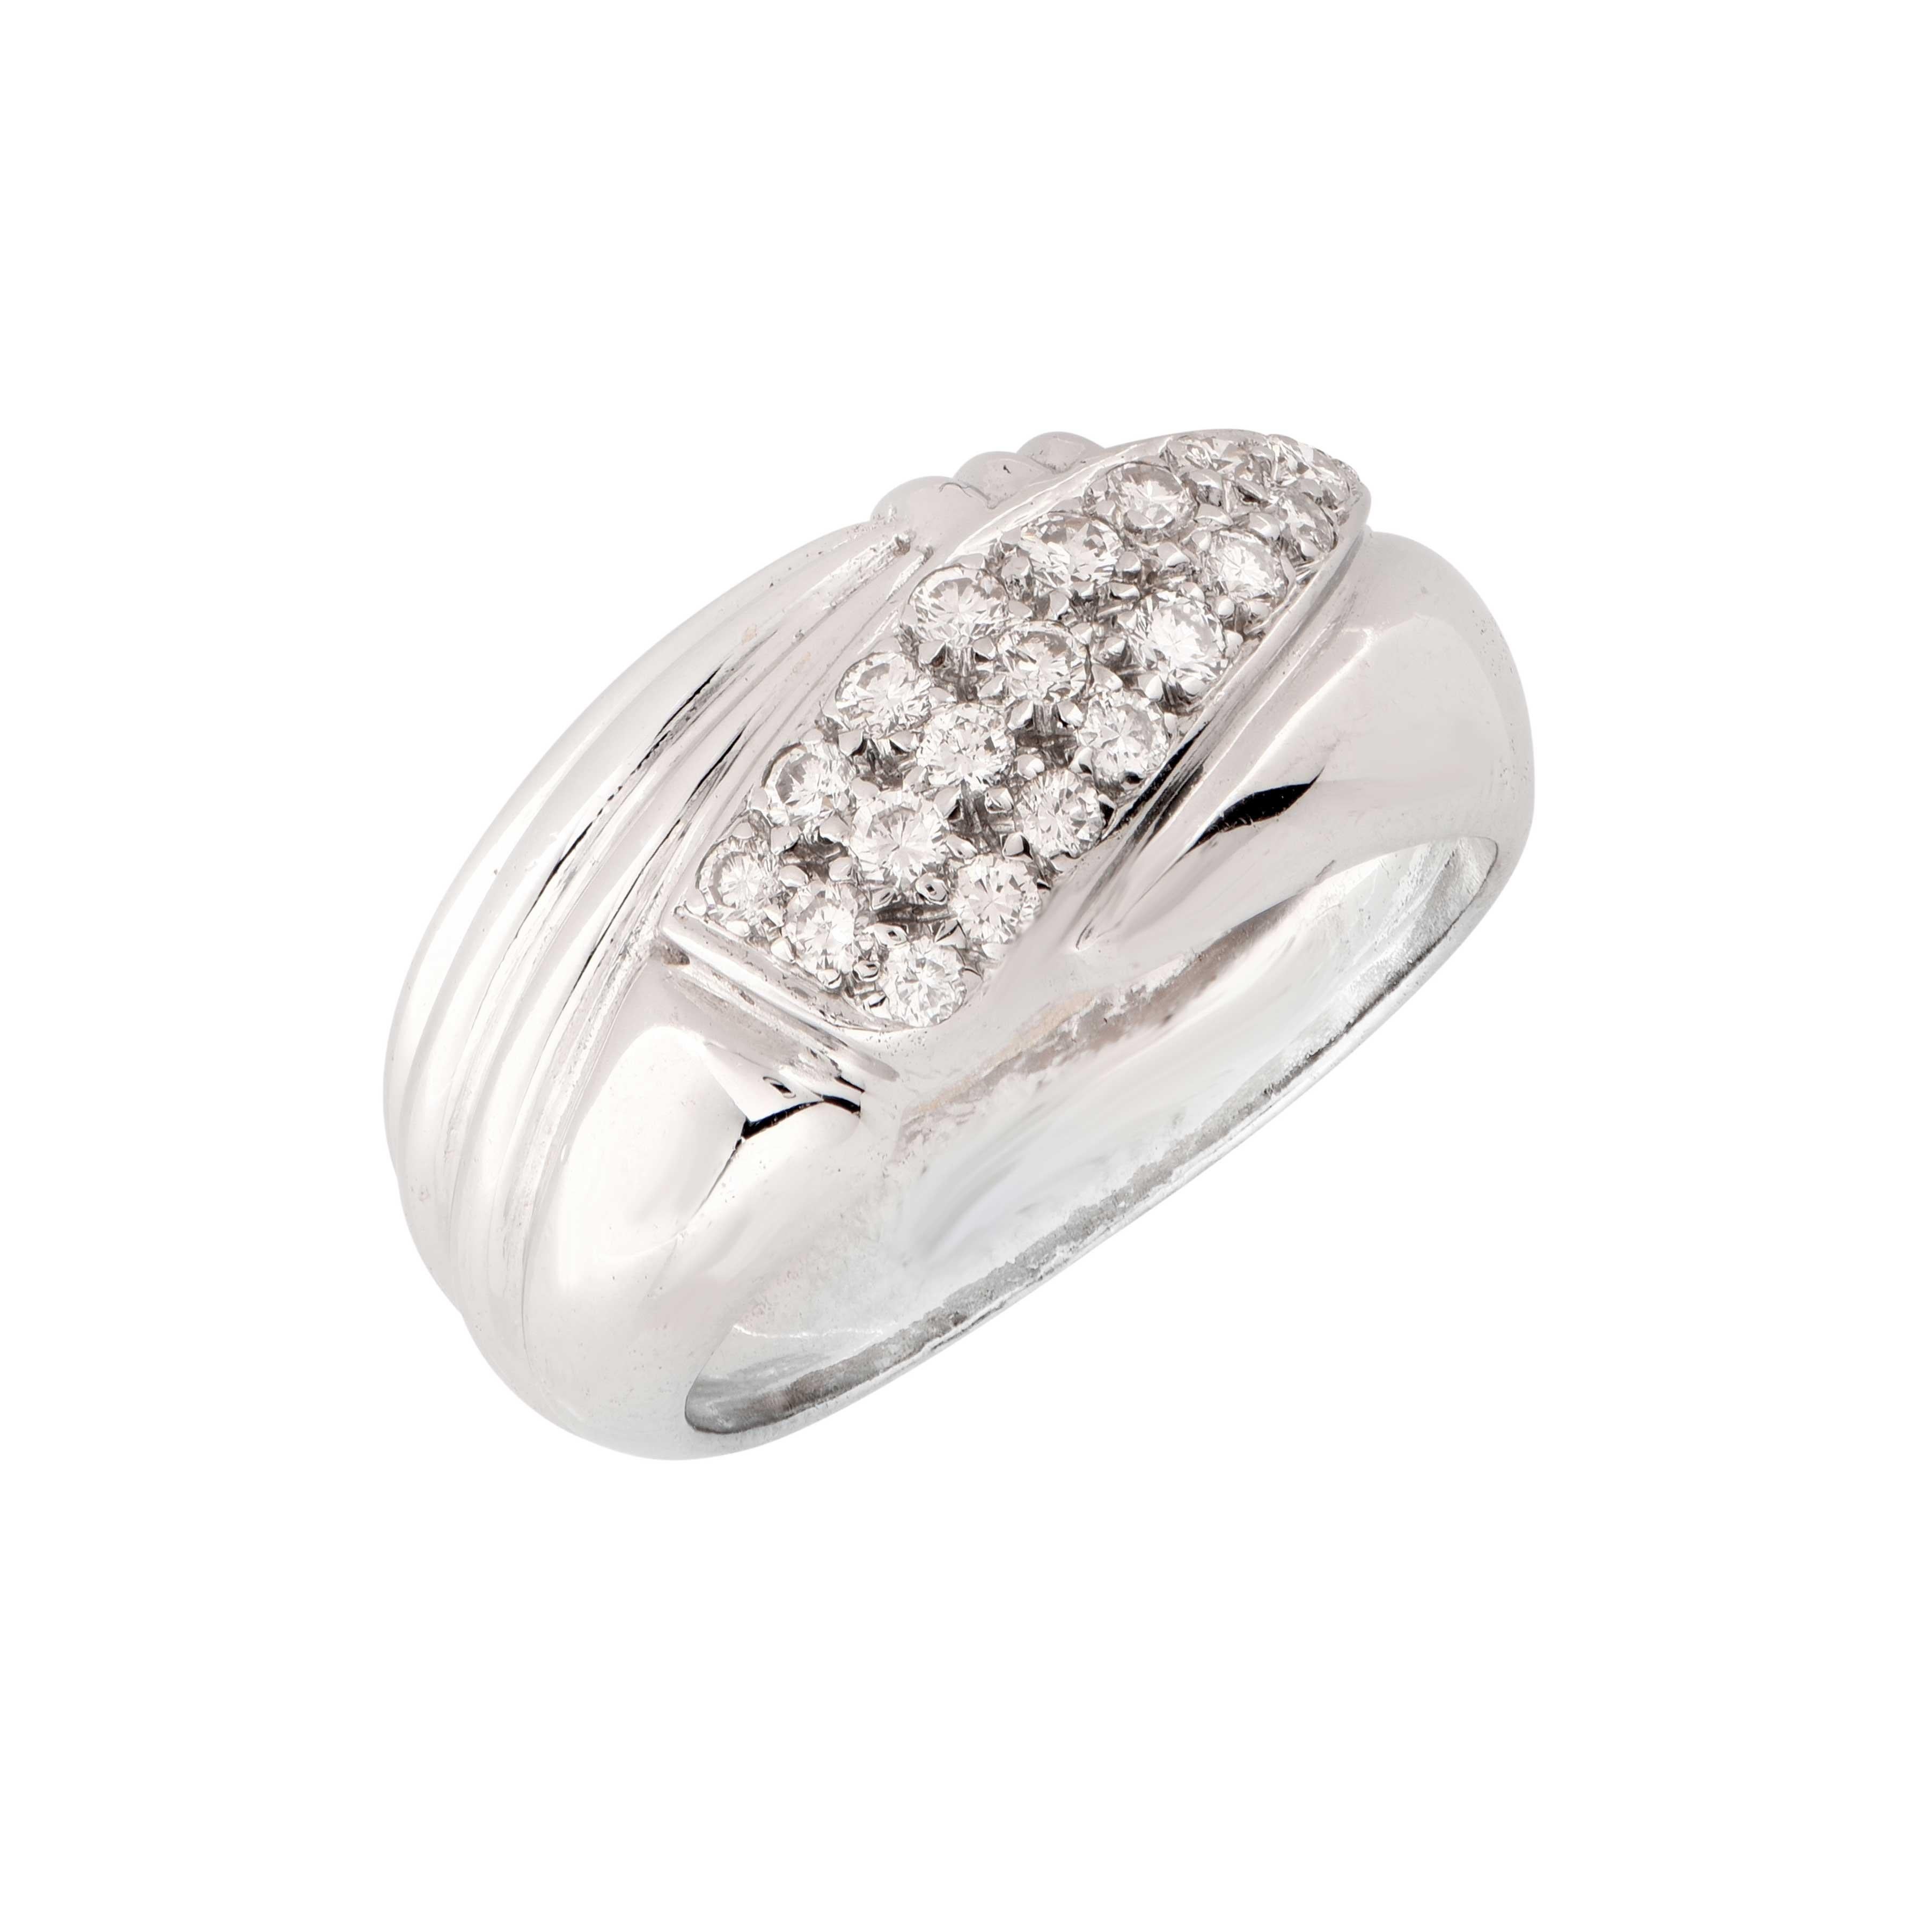 Diamond White Gold Ring  In Excellent Condition For Sale In Bay Harbor Islands, FL